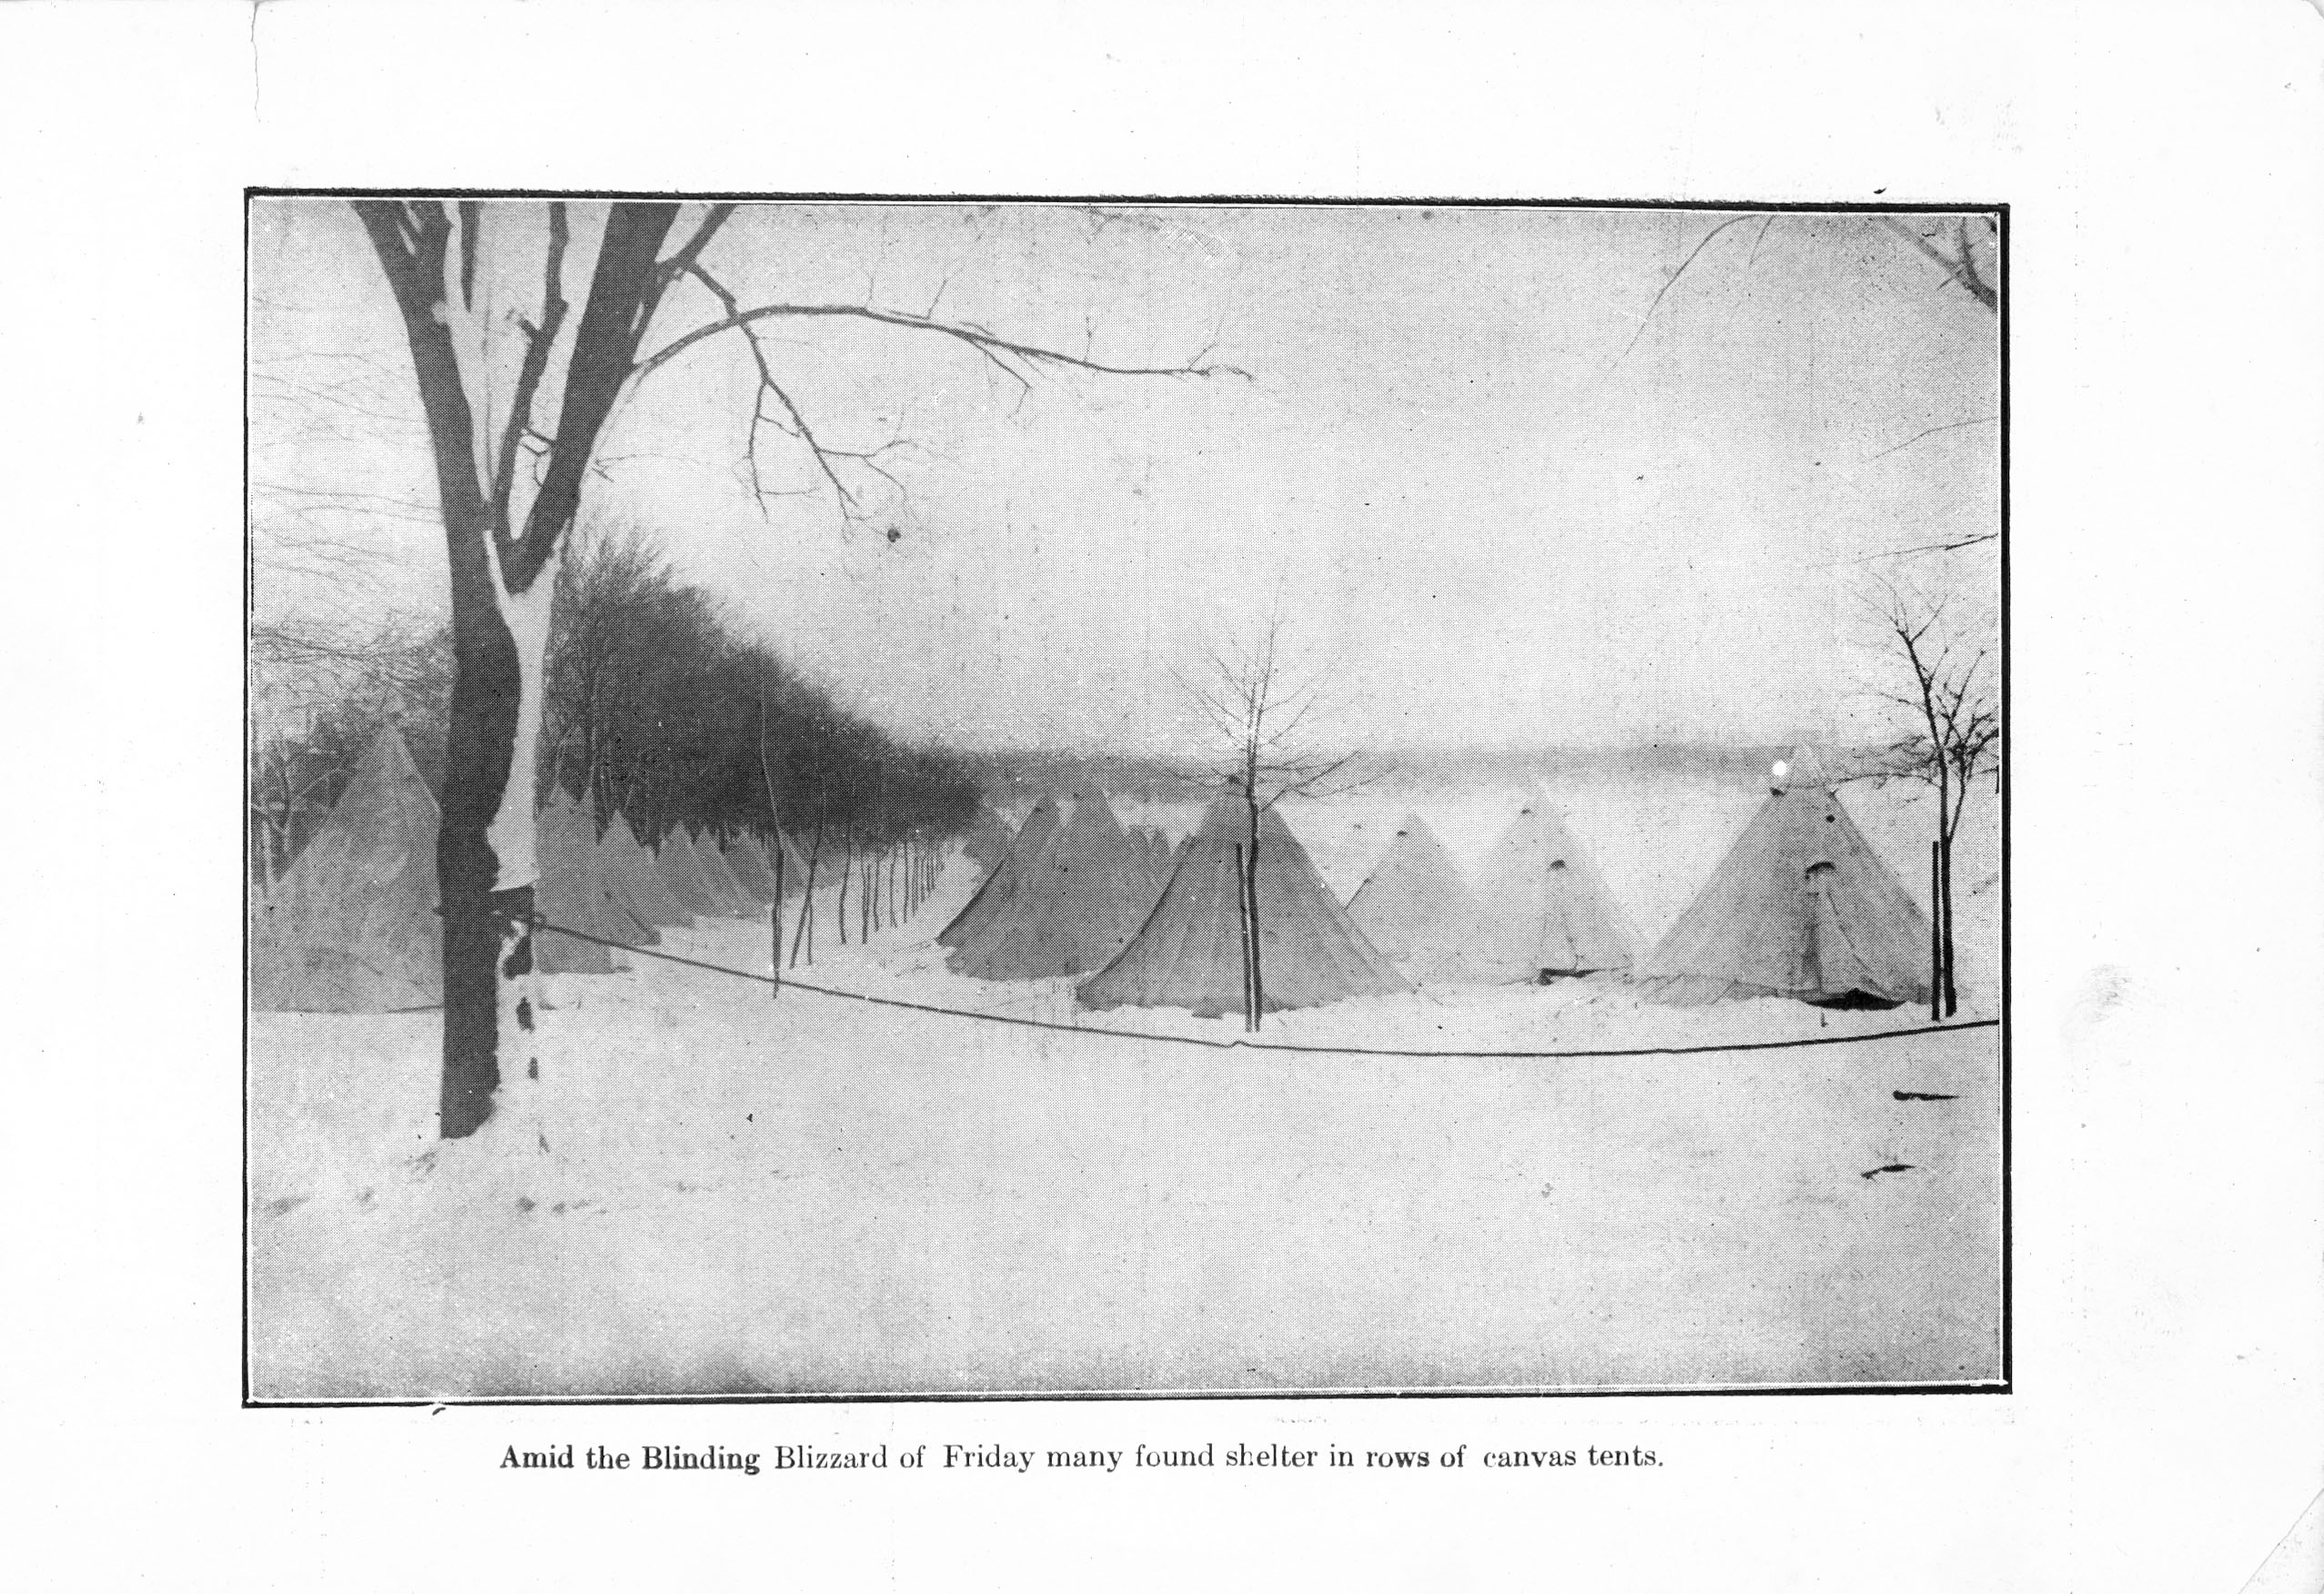 Black and white photo of rows of canvas tents in the snow with caption “